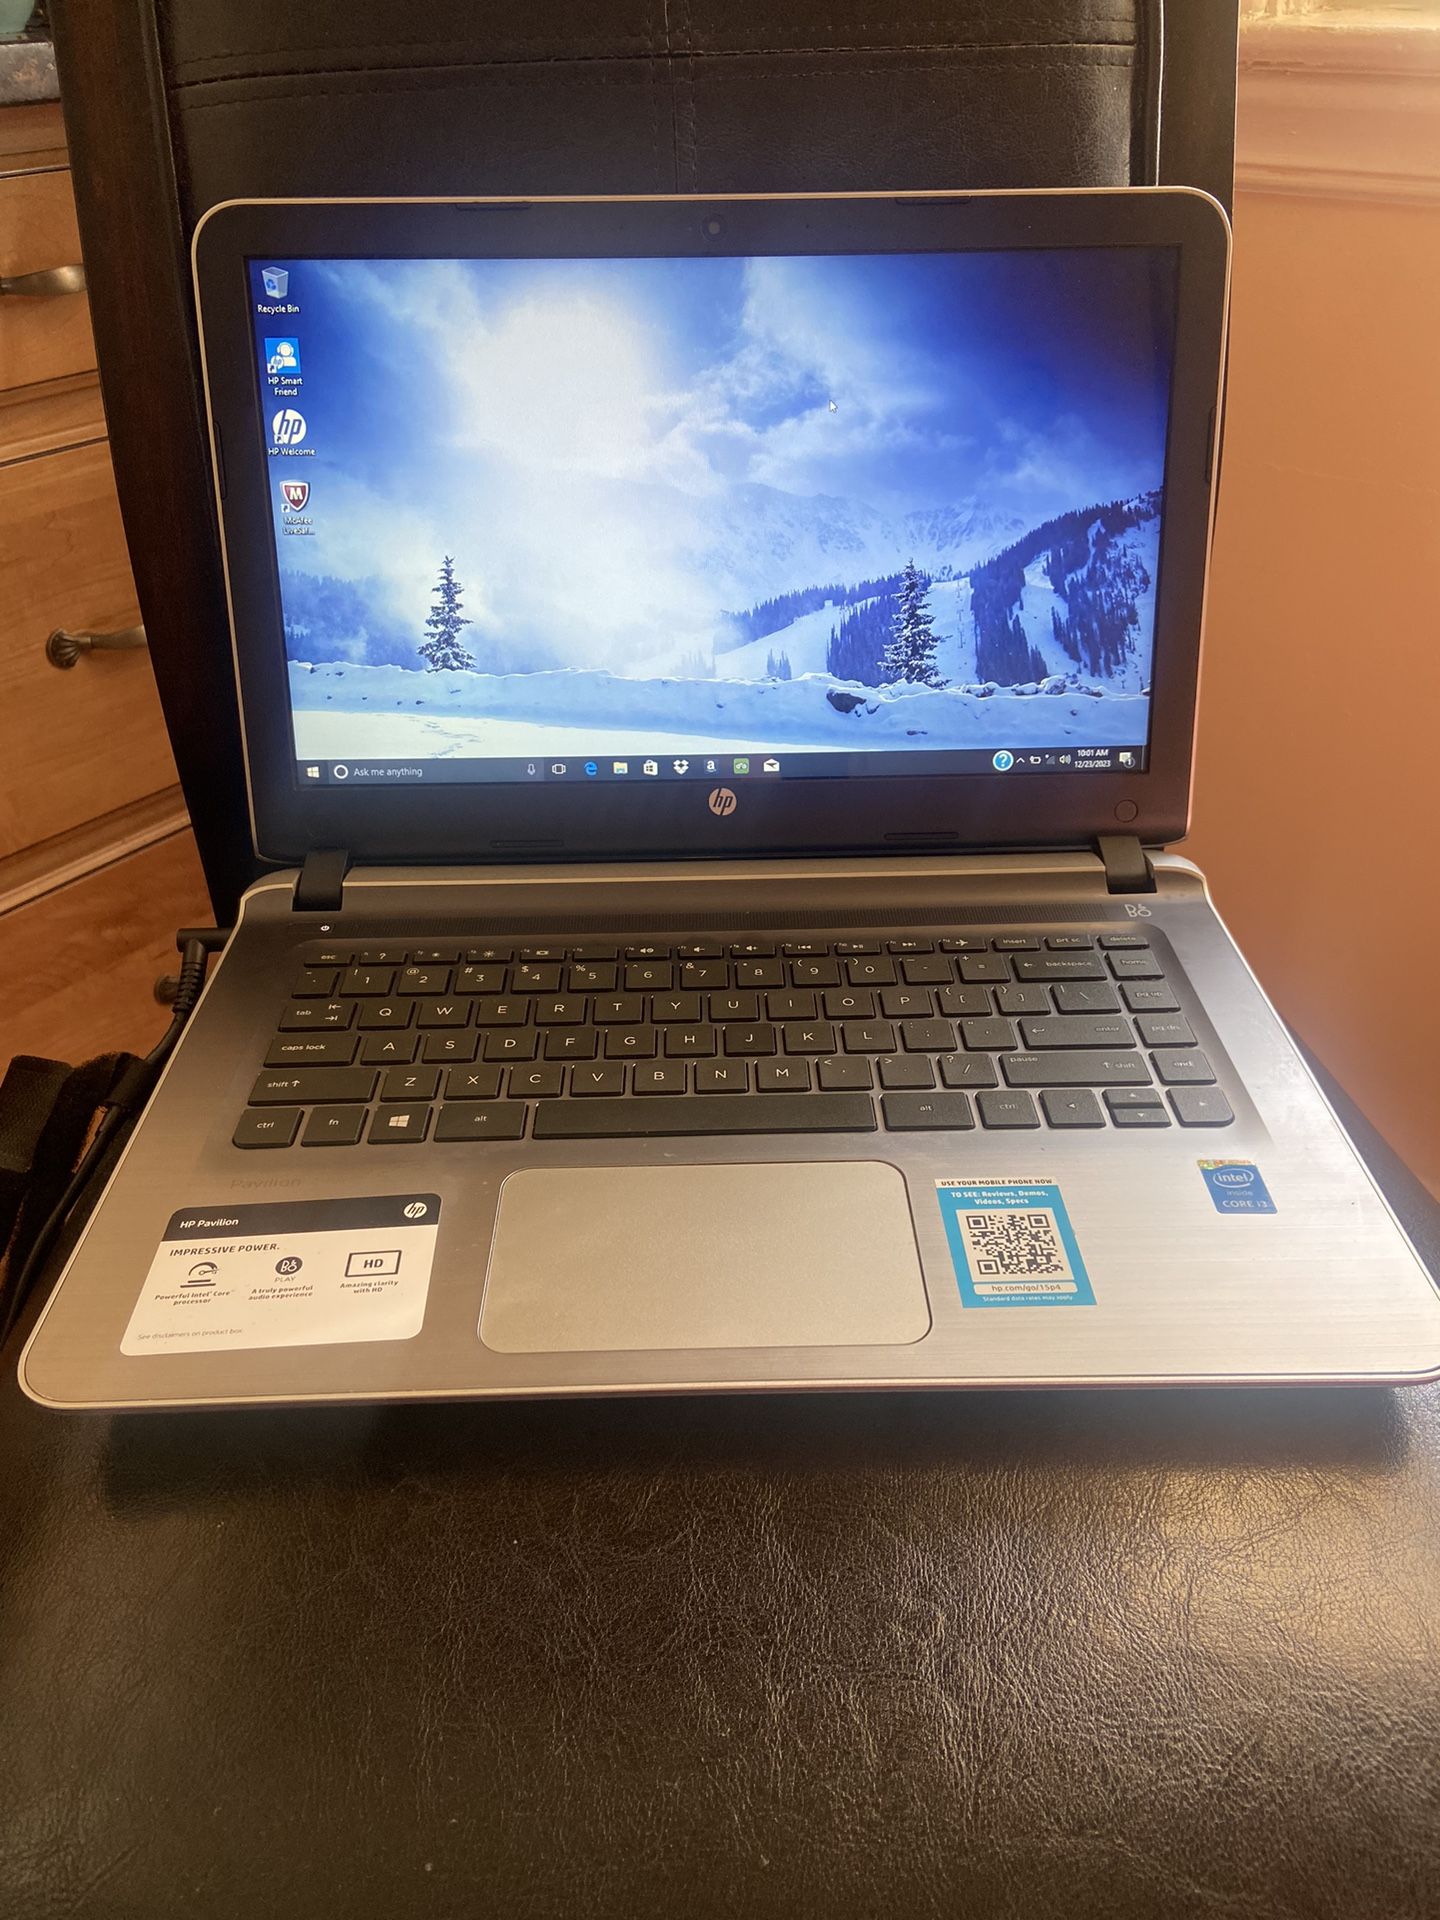 HP Laptop Computer- Windows 10. Only works when plugged in. Comes with charger.